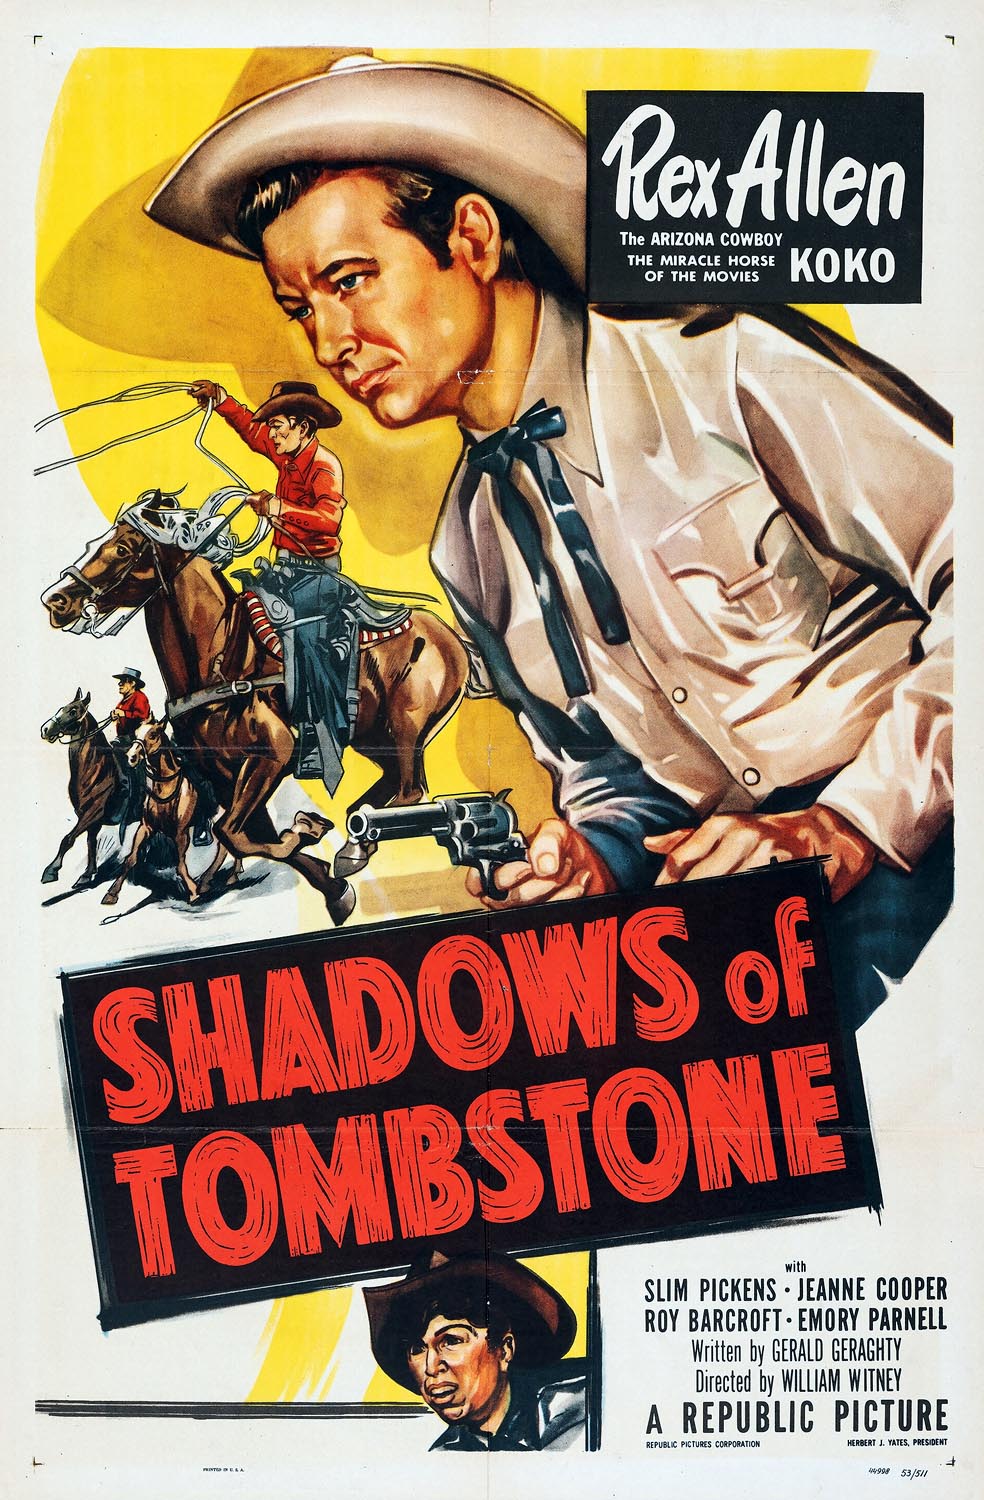 SHADOWS OF TOMBSTONE